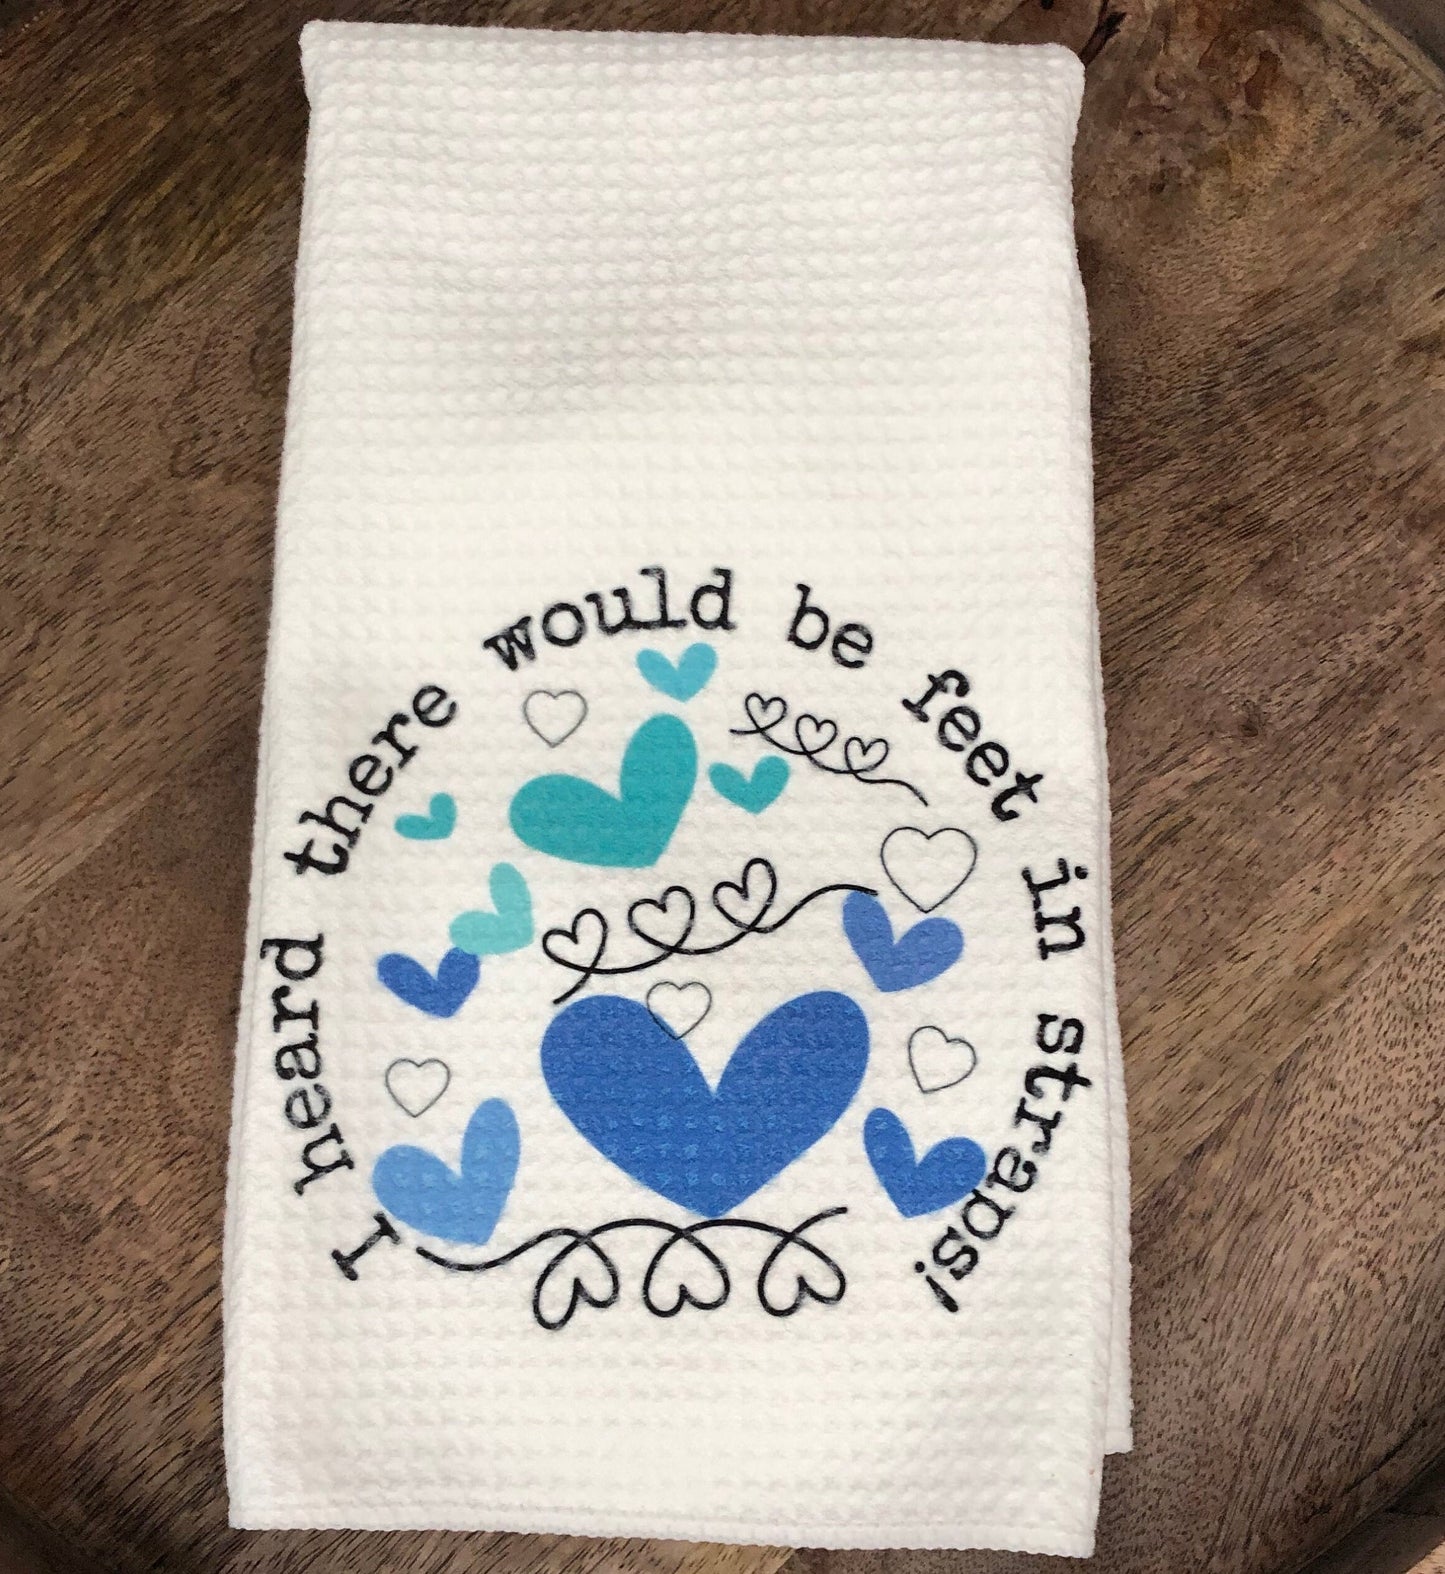 Pilates fun towel  "I heard there would be feet in straps"  pilates gift,Pilates student gifts, Pilates Love,  Pilates